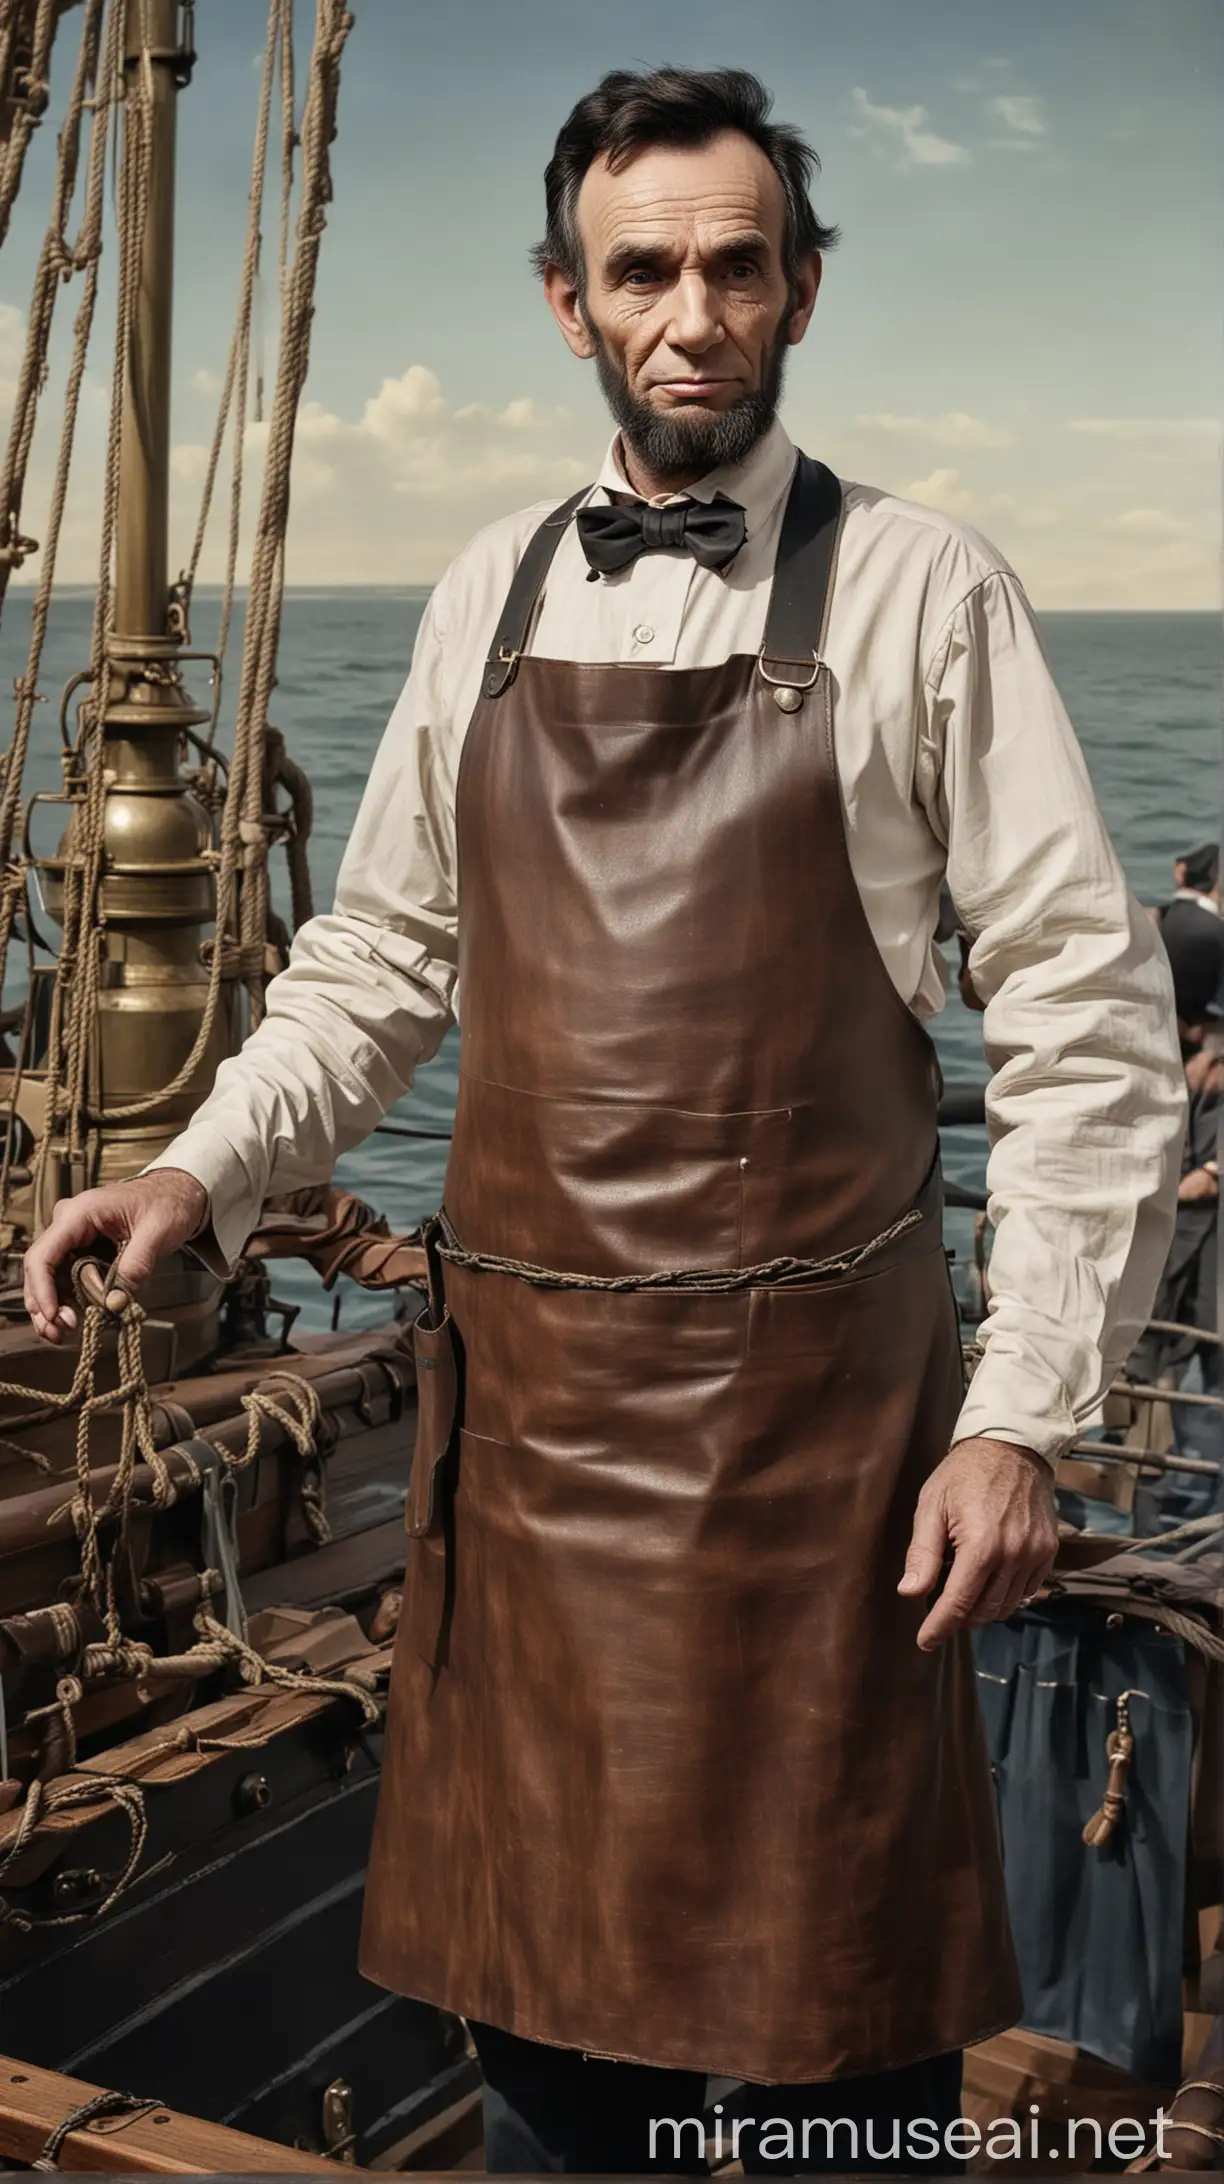 abraham lincoln wearing a leather apron on a warship holding the constitution. in color 